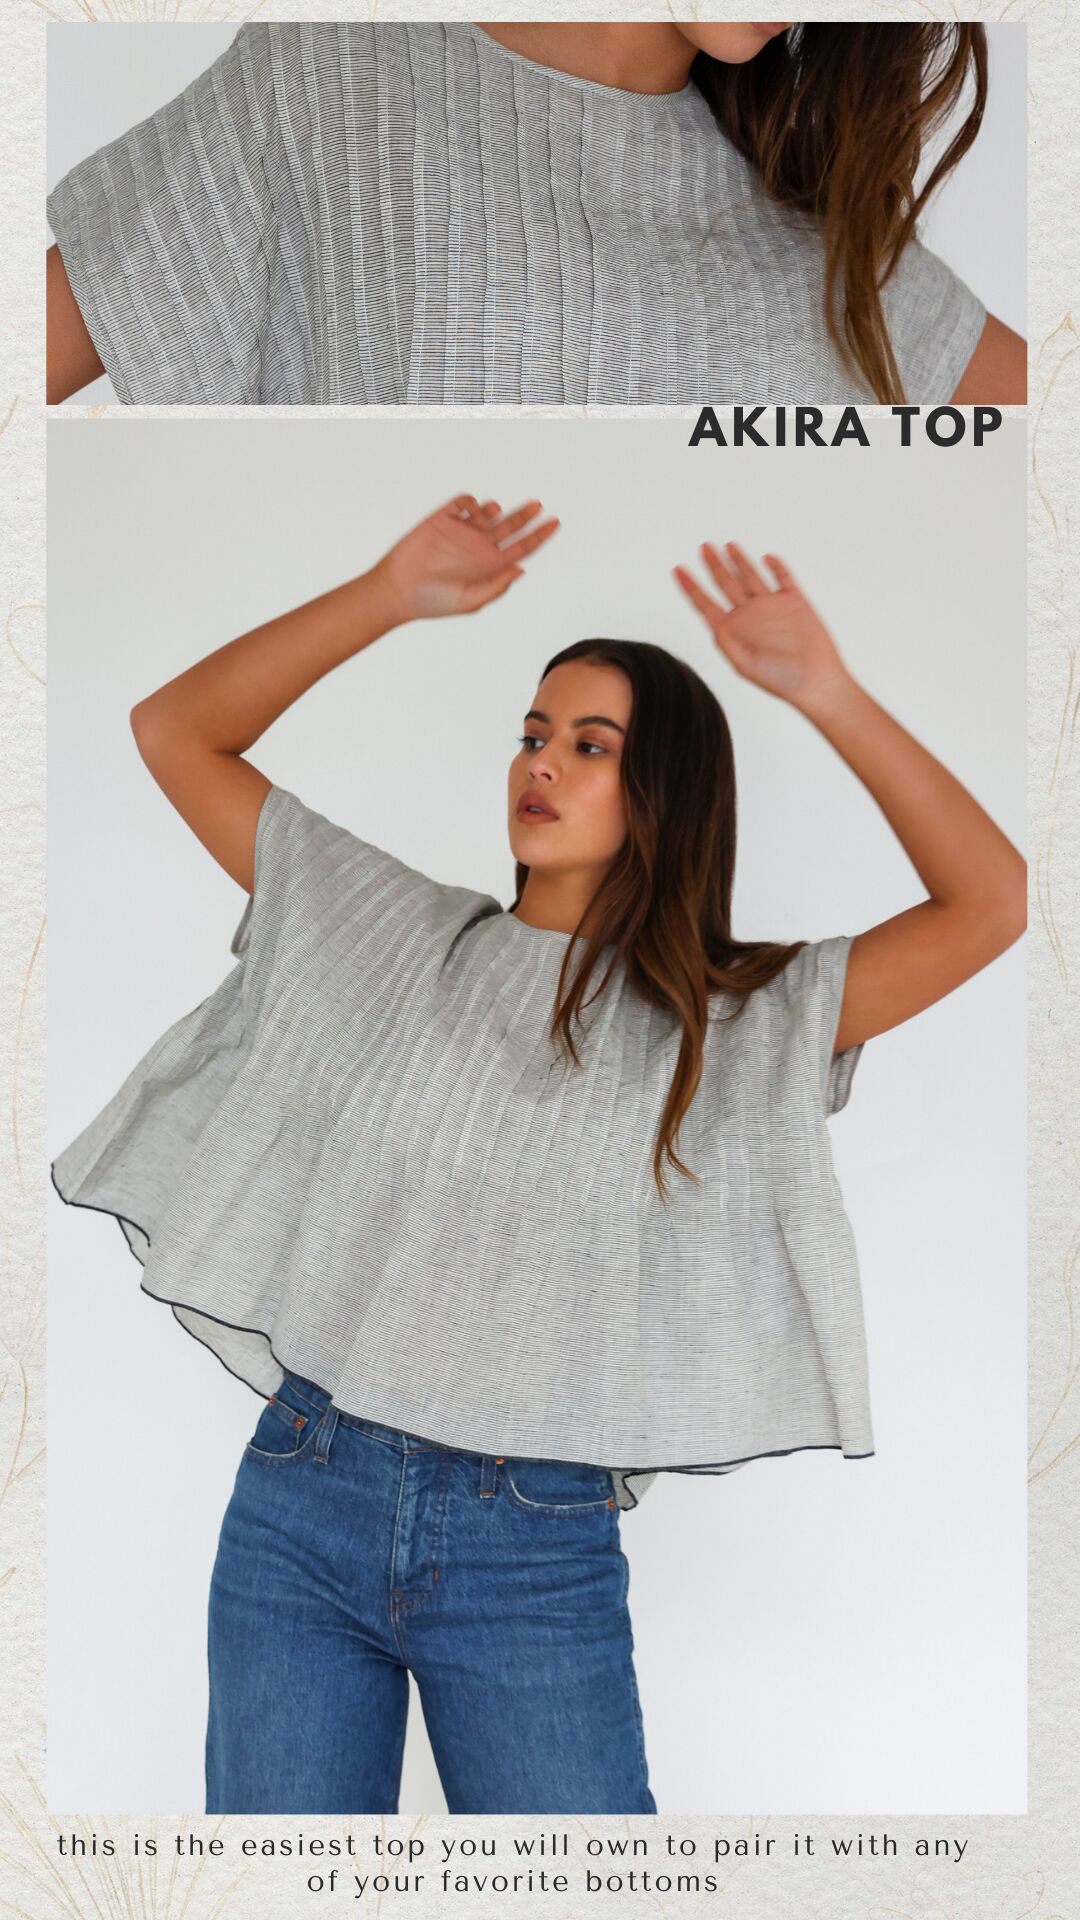 Akira top, the easiest top you will own,  pair with any of your favourite bottoms